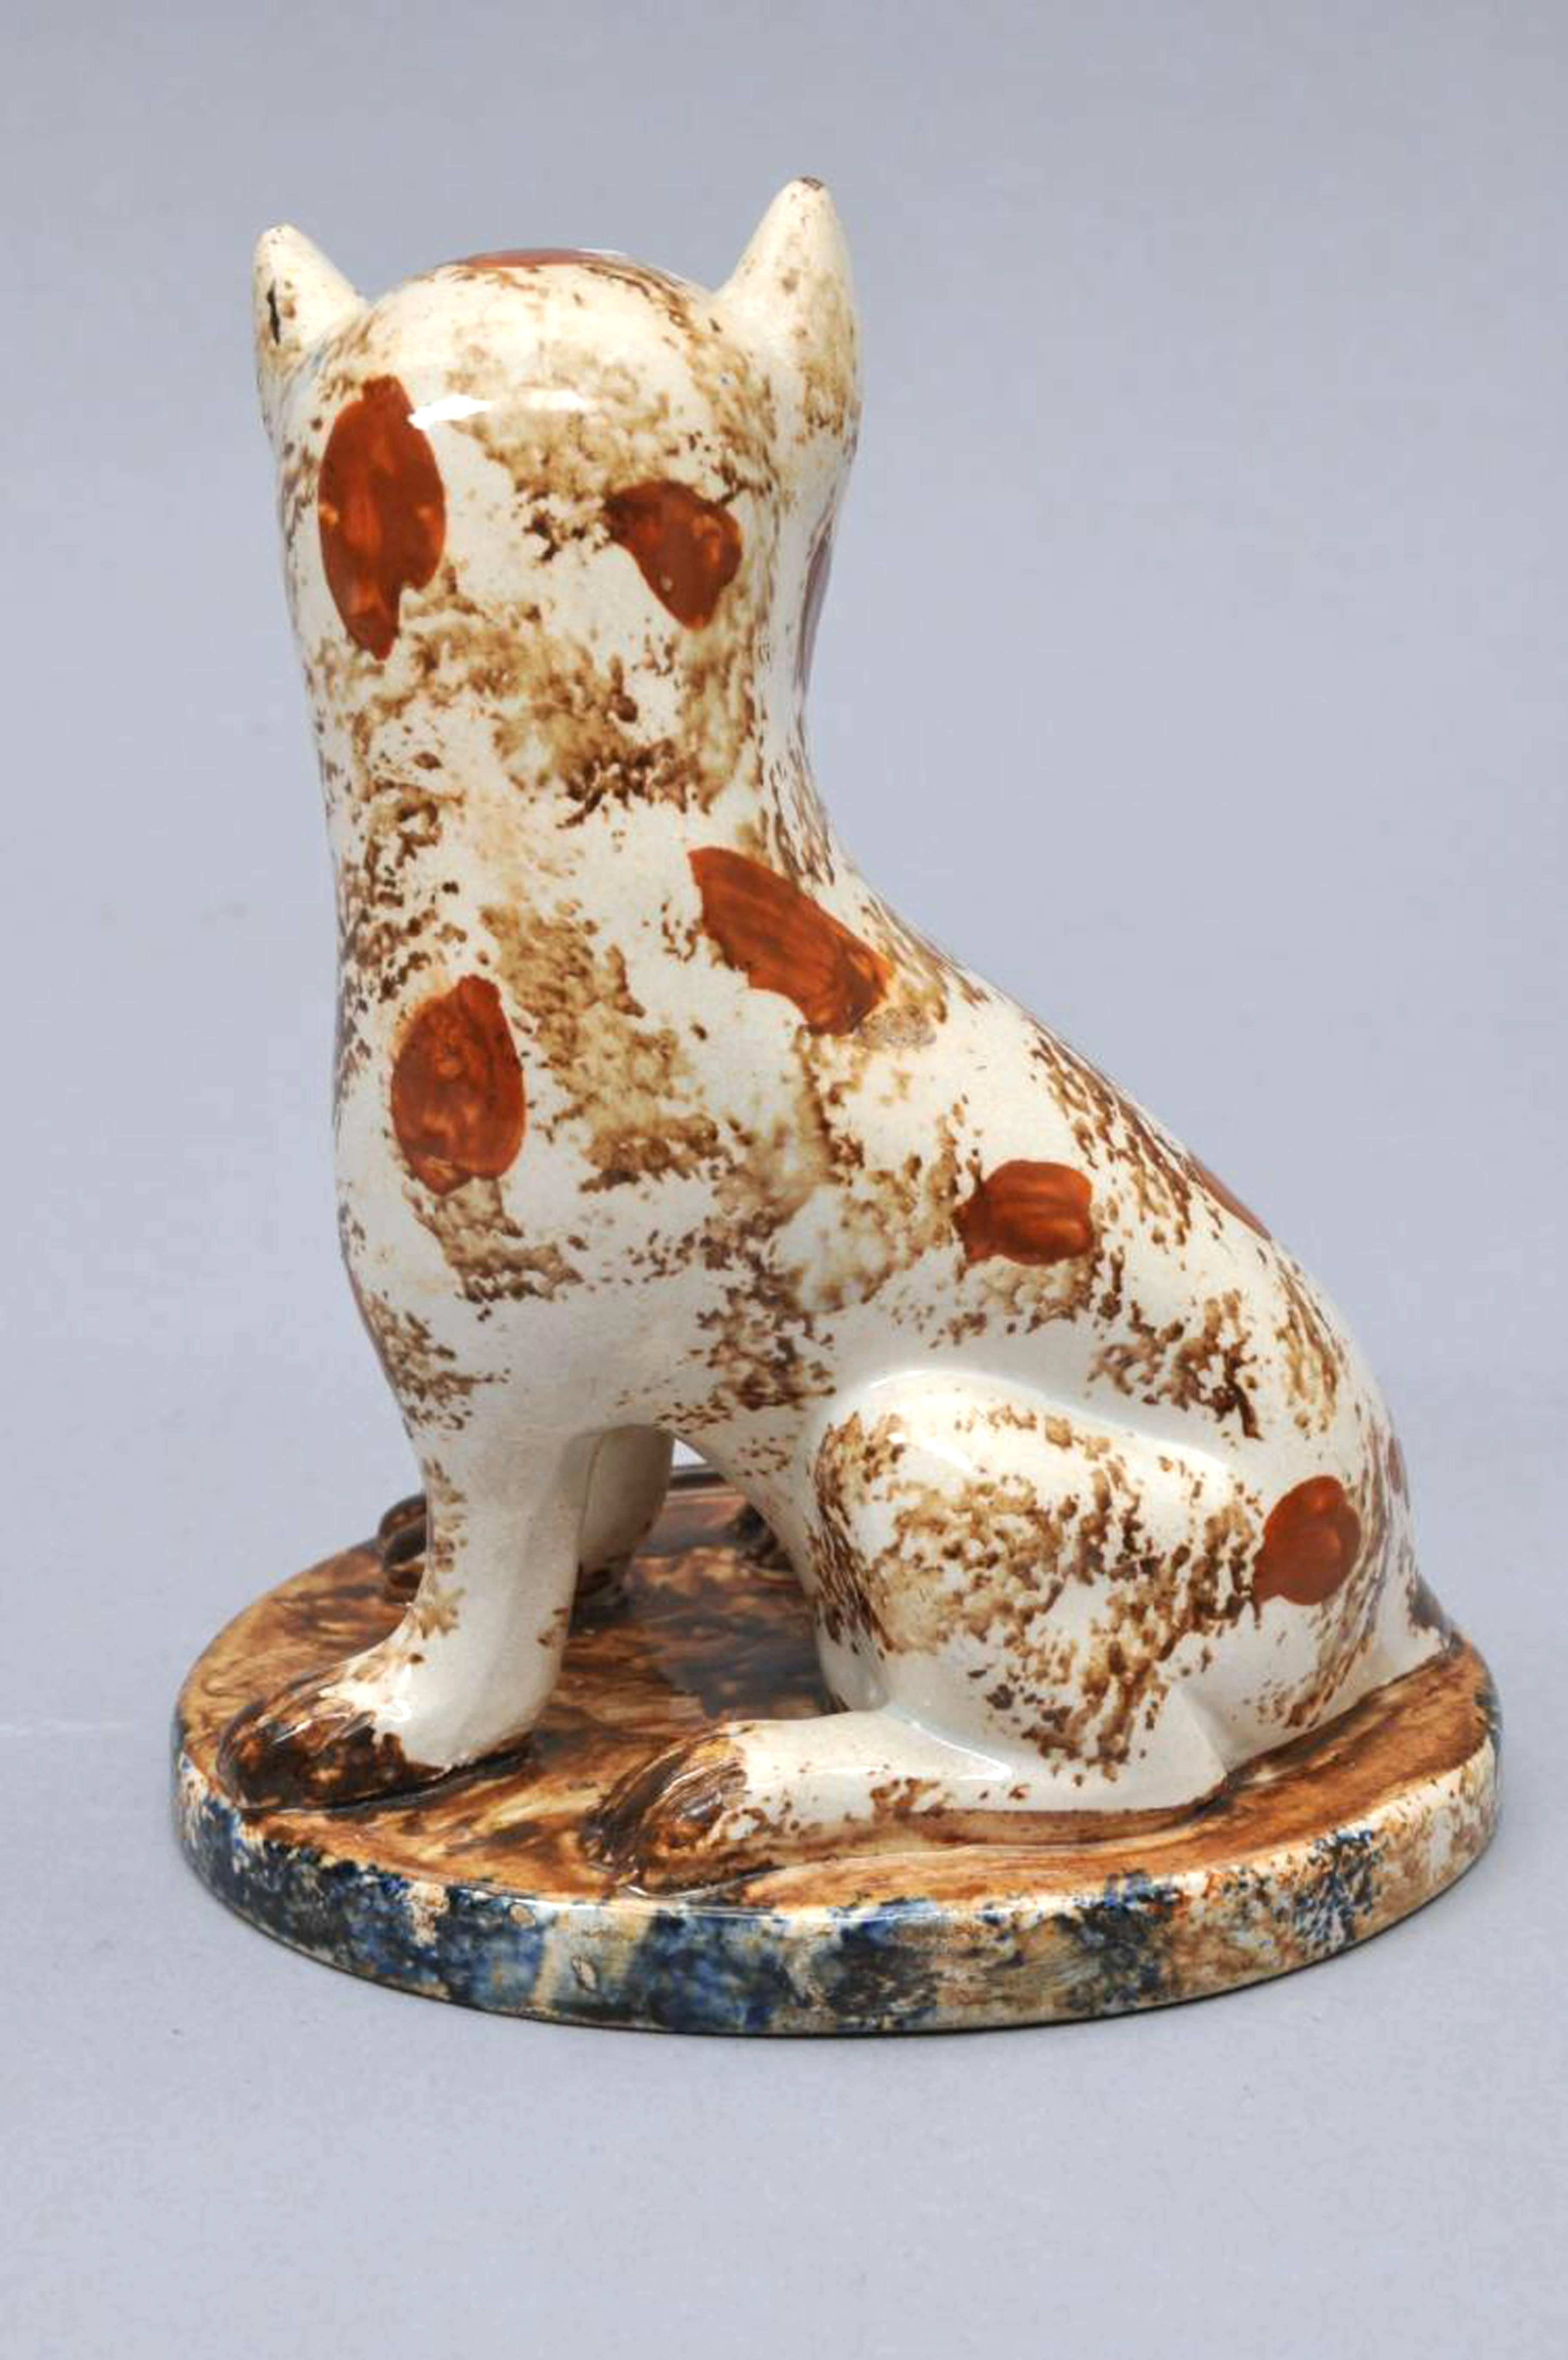 Early Staffordshire Pottery Cat, 
Early 19th century.

The large whimsical cat with brown and iron-red sponging sits on its hind quarters on an oval base with blue sponging with a bemused expression on its face. 

Dimensions: Height 5 1/2